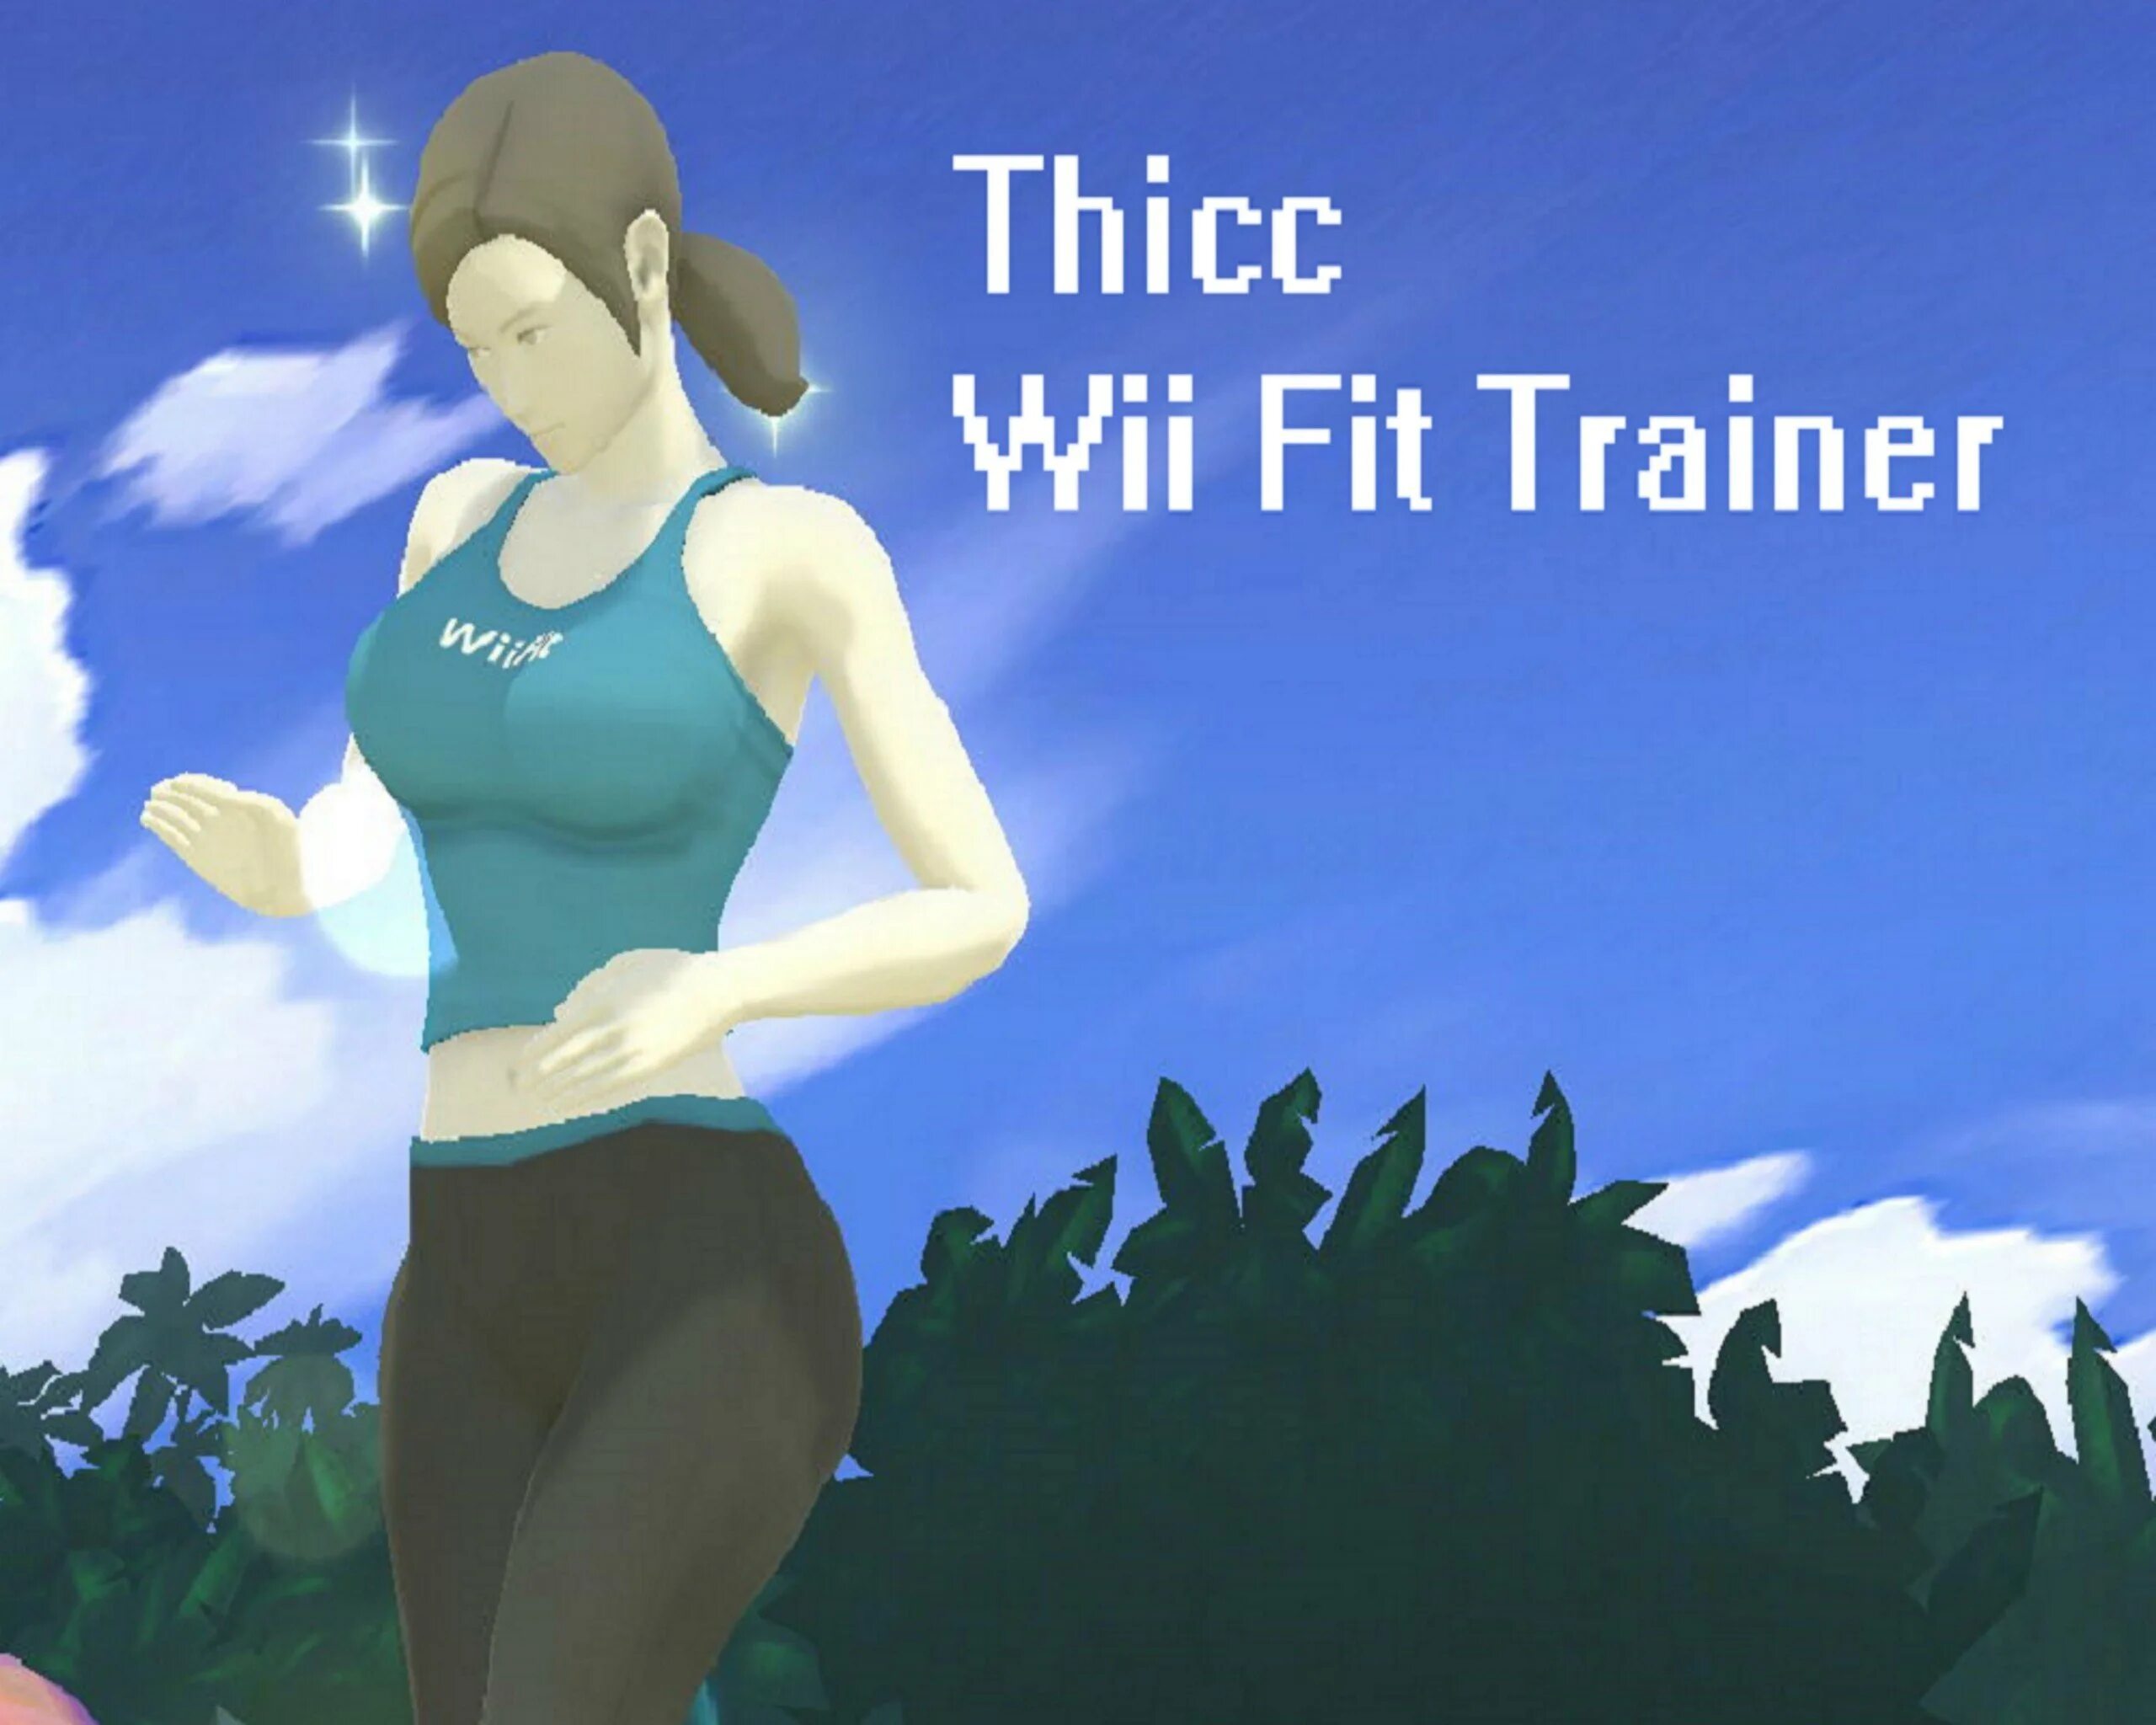 Wii Fit тренер. Wii Fit Trainer super Smash. Wii Fit Trainer 34. Wii Fit Trainer 18.